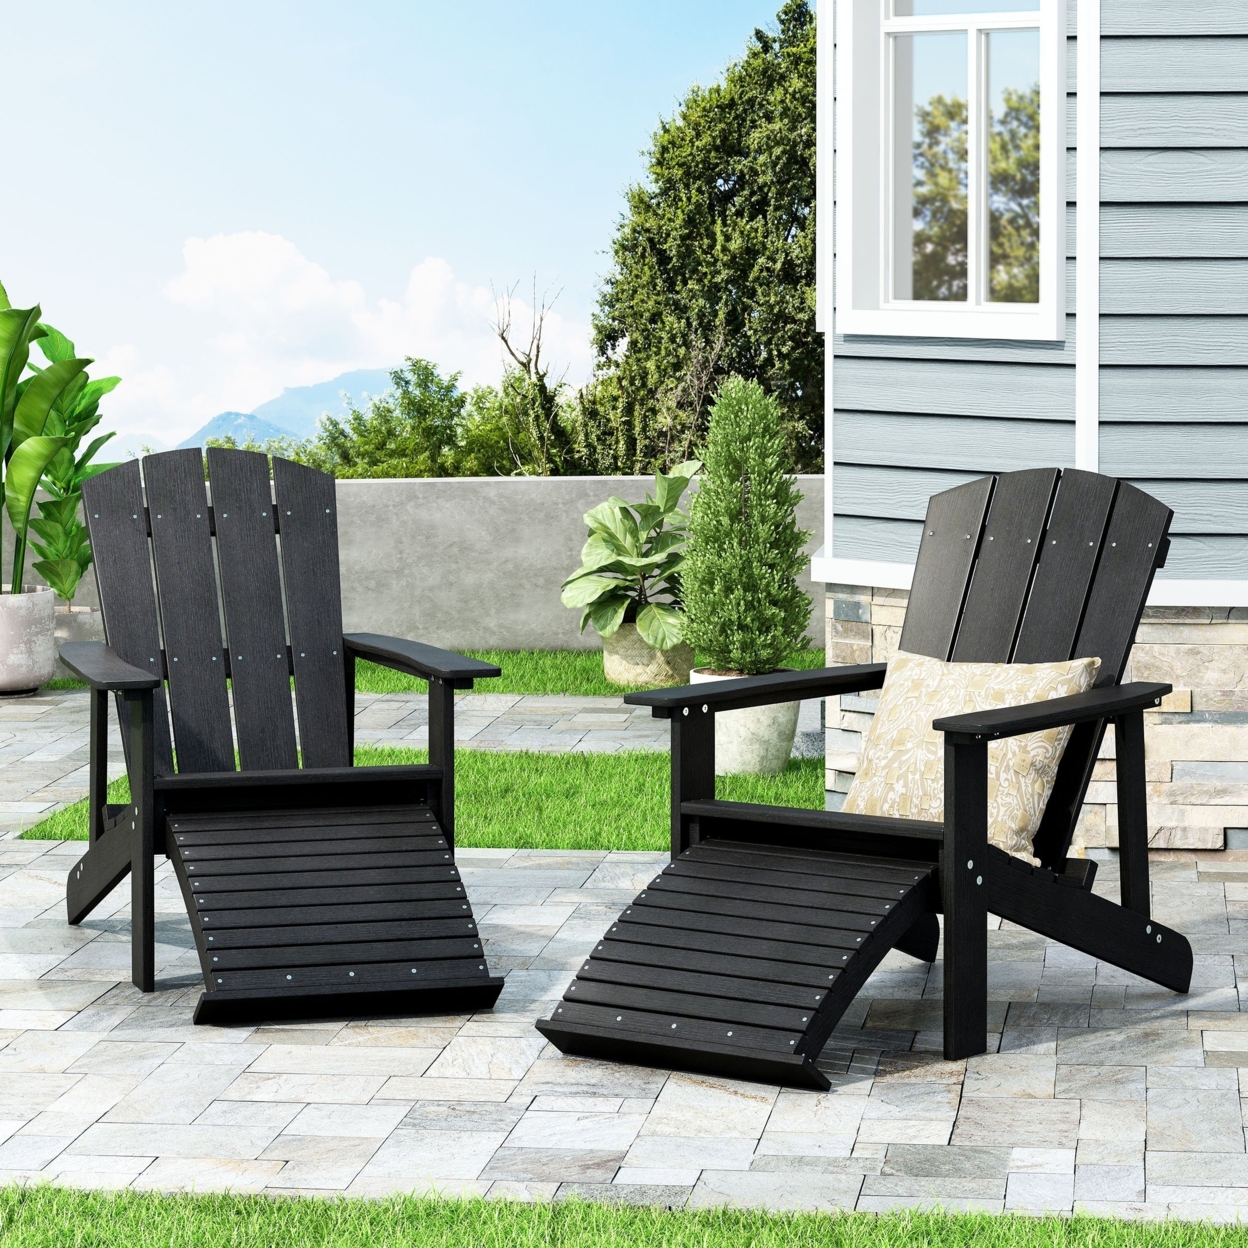 Matriel Outdoor Adirondack Chair With Retractable Ottoman (Set Of 2) - White